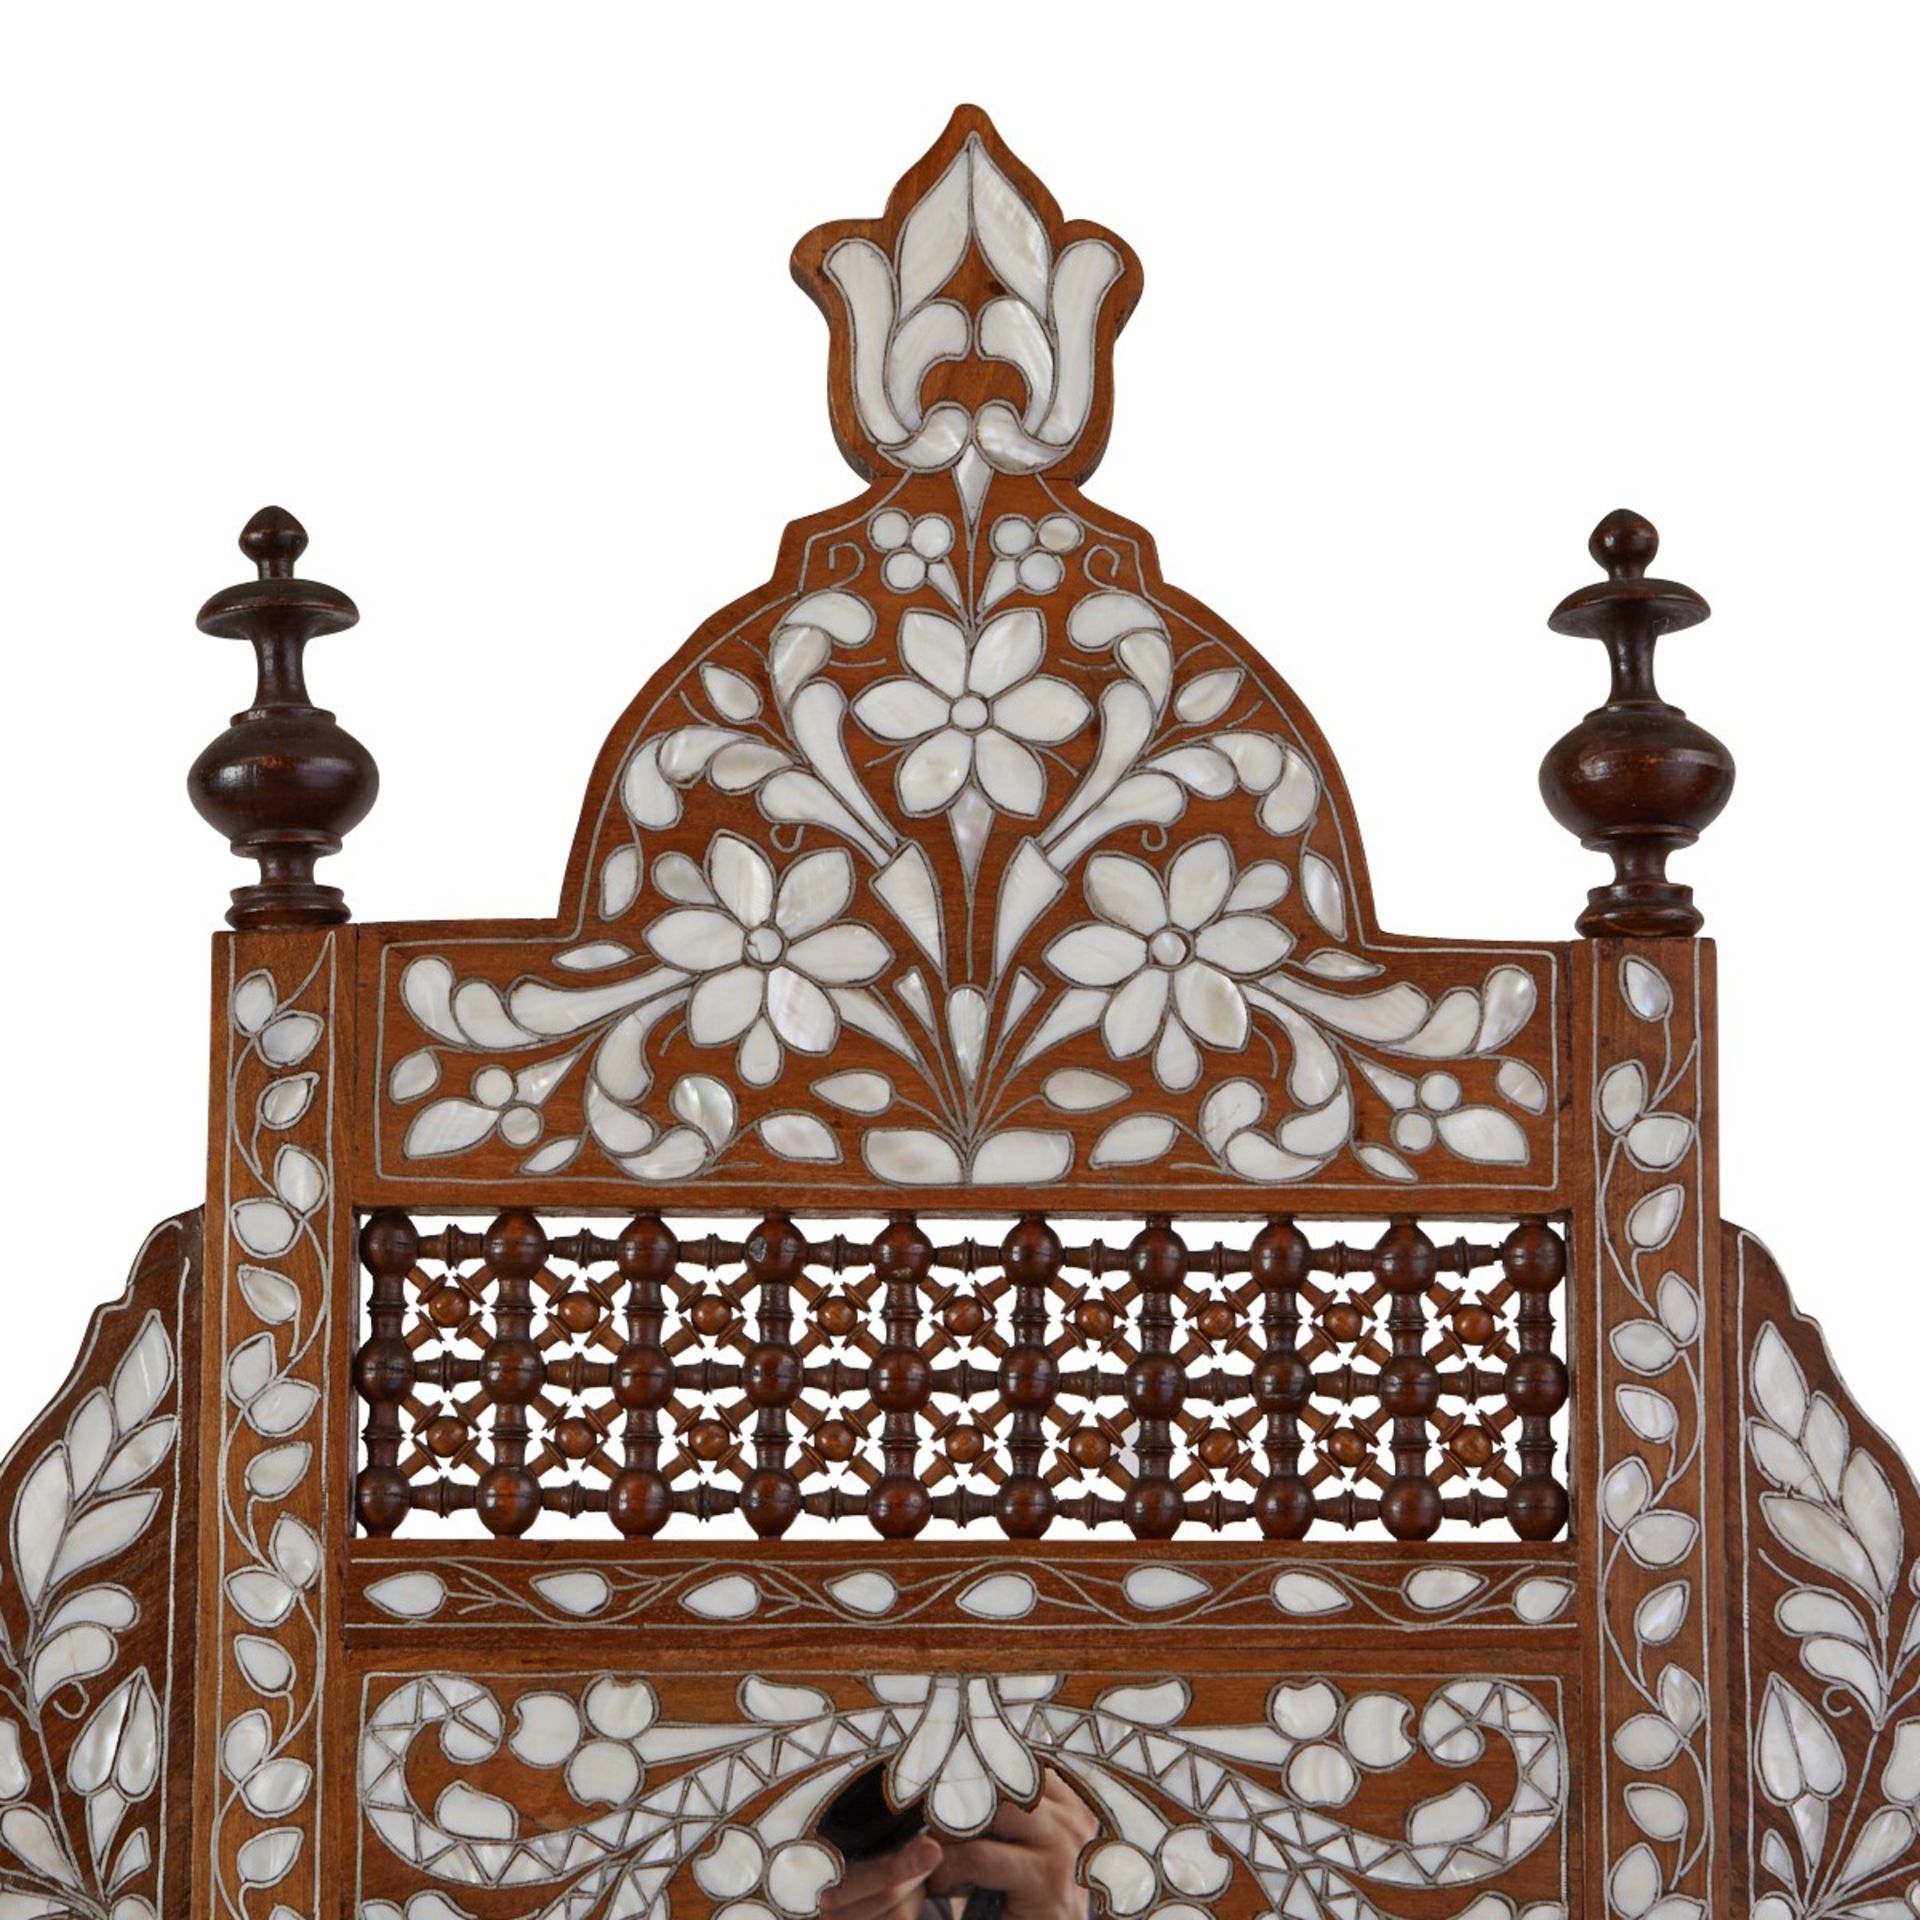 Syrian Mother of Pearl Inlaid Dressing Table - Image 7 of 10